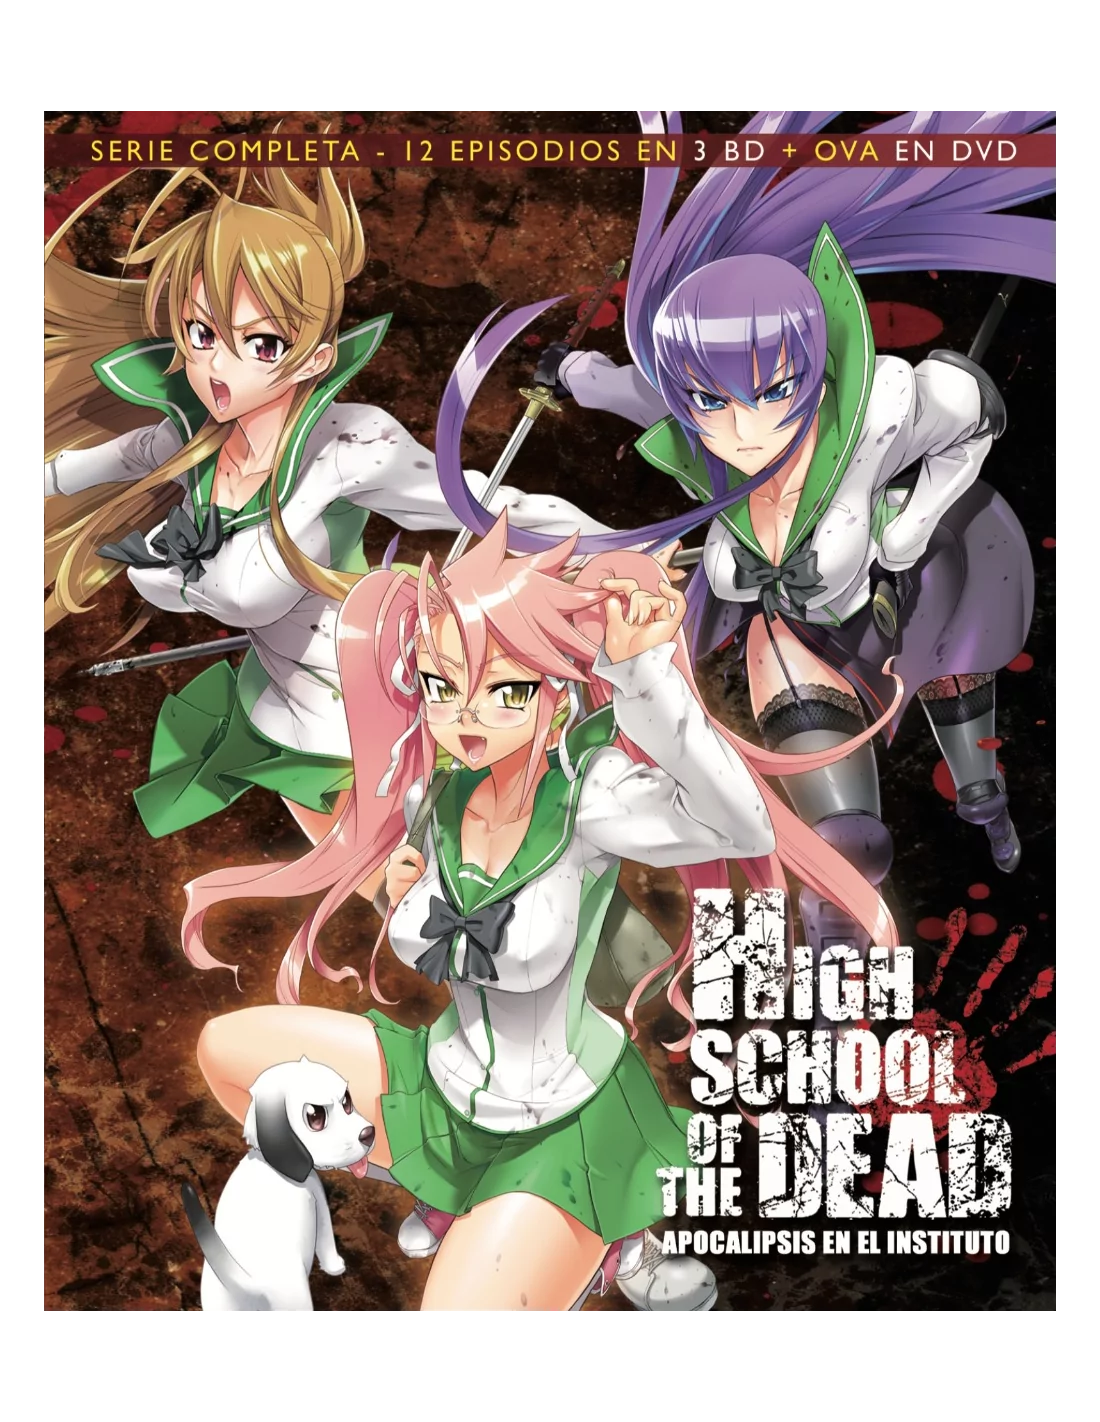 brian gersh recommends Highschool Of The Dead Episode 13